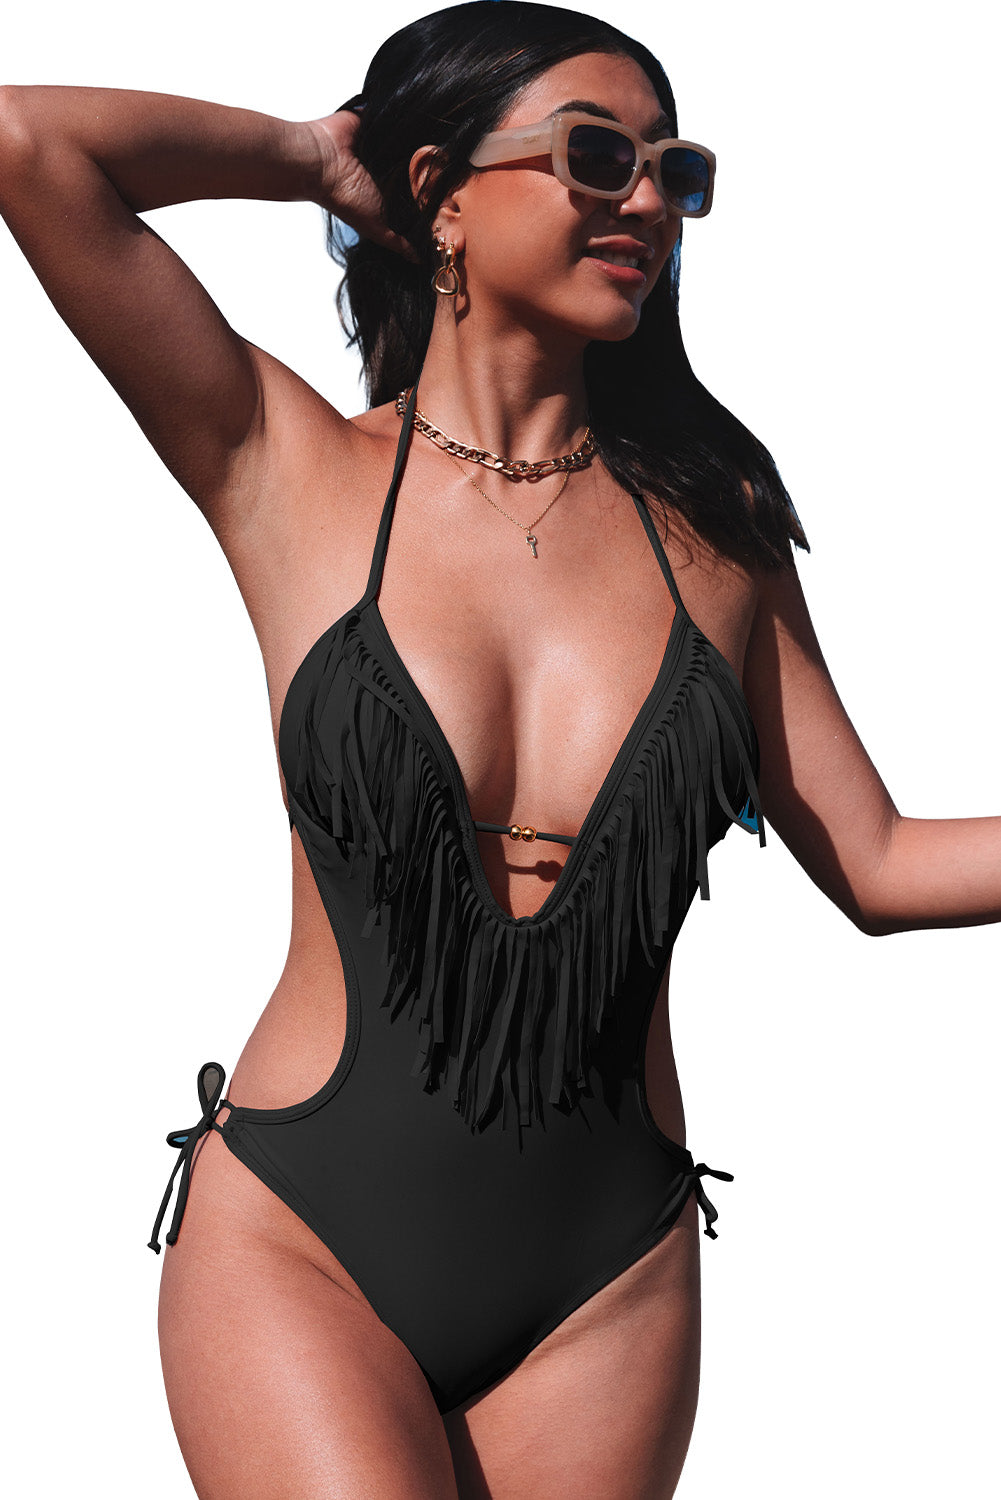 LC443432-2-S, LC443432-2-M, LC443432-2-L, LC443432-2-XL, LC443432-2-2XL, Black Tassel One Piece Swimsuits for Women Halter Backless Sexy Swimwear